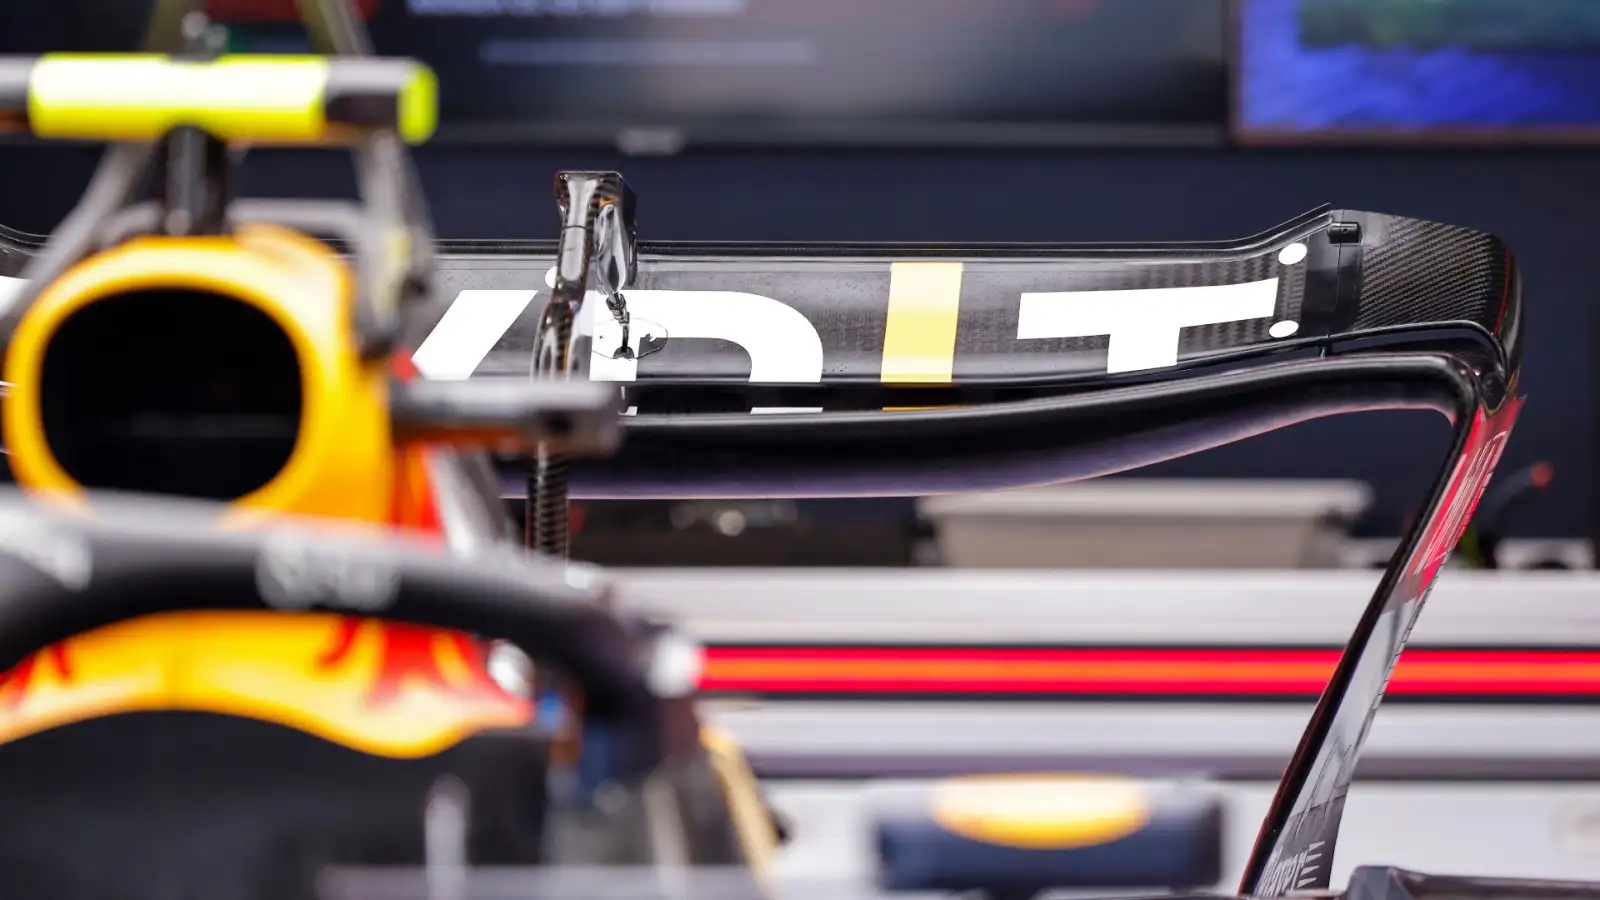 Red Bull's rear wing on show in the garage ahead of the Italian Grand Prix.